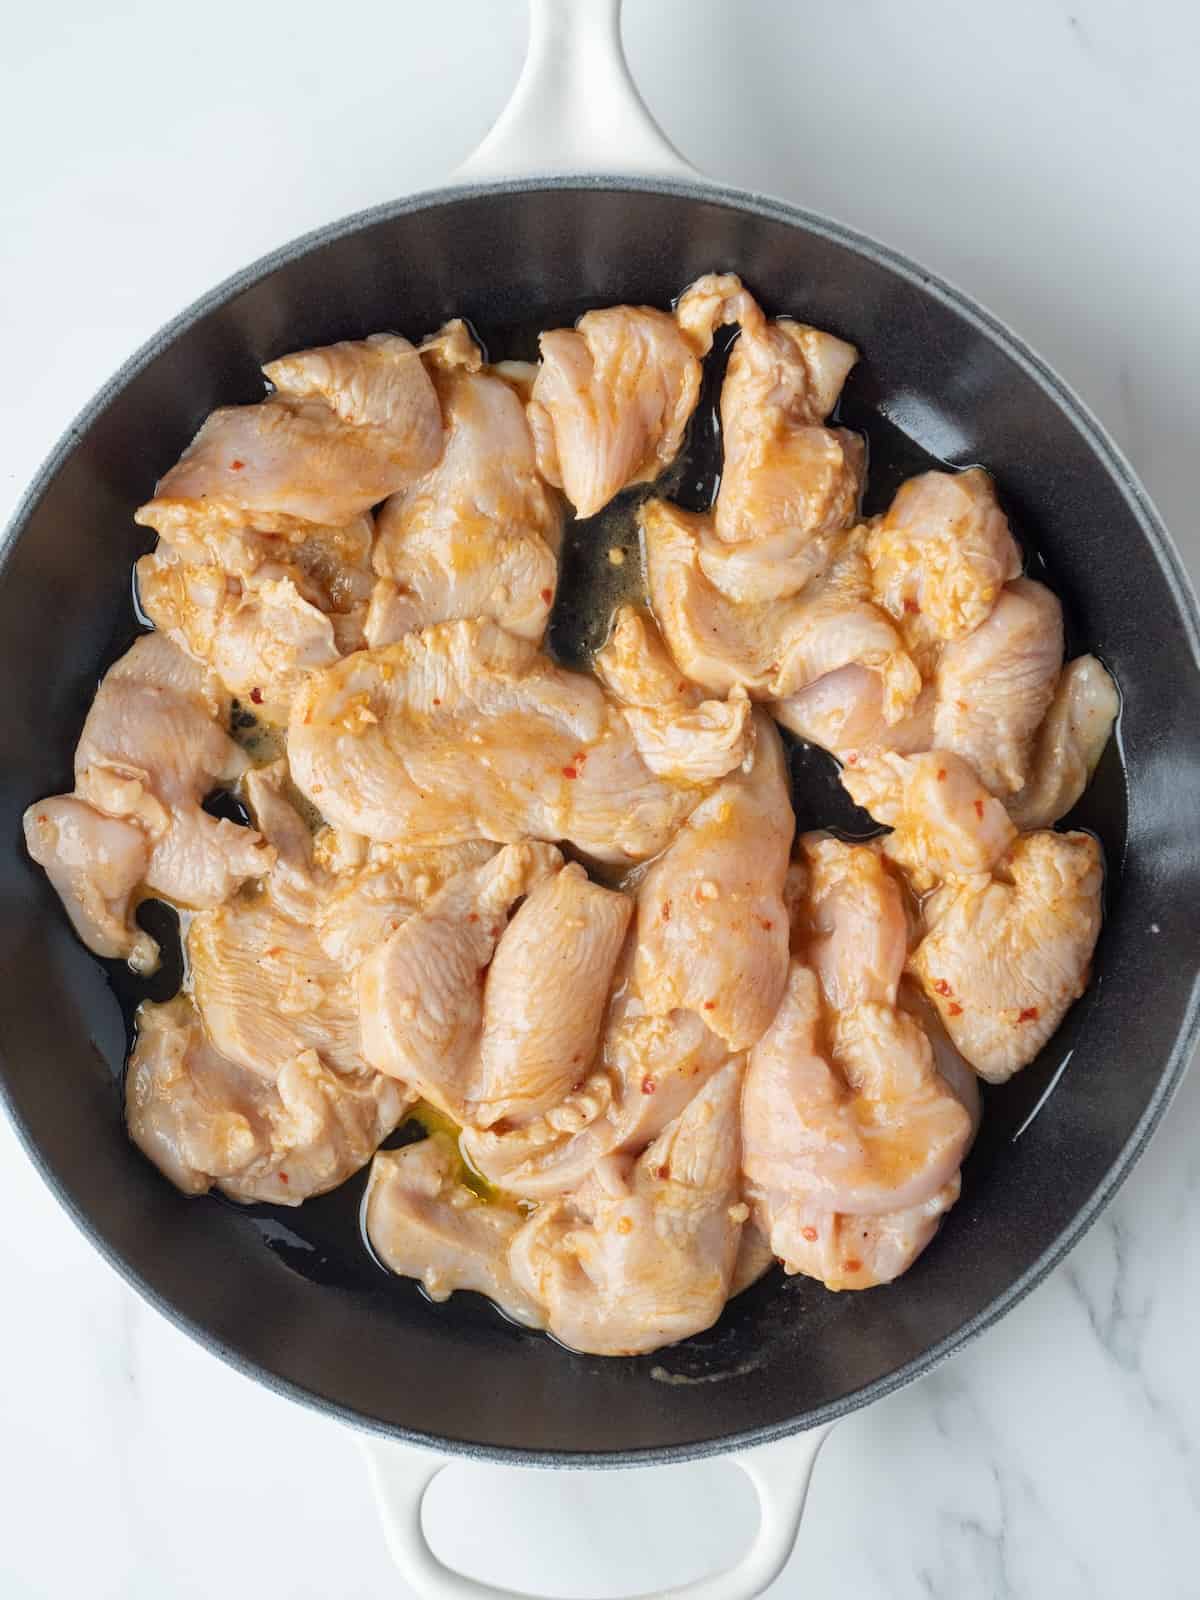 A cast iron skillet with marinated chicken being cooked.